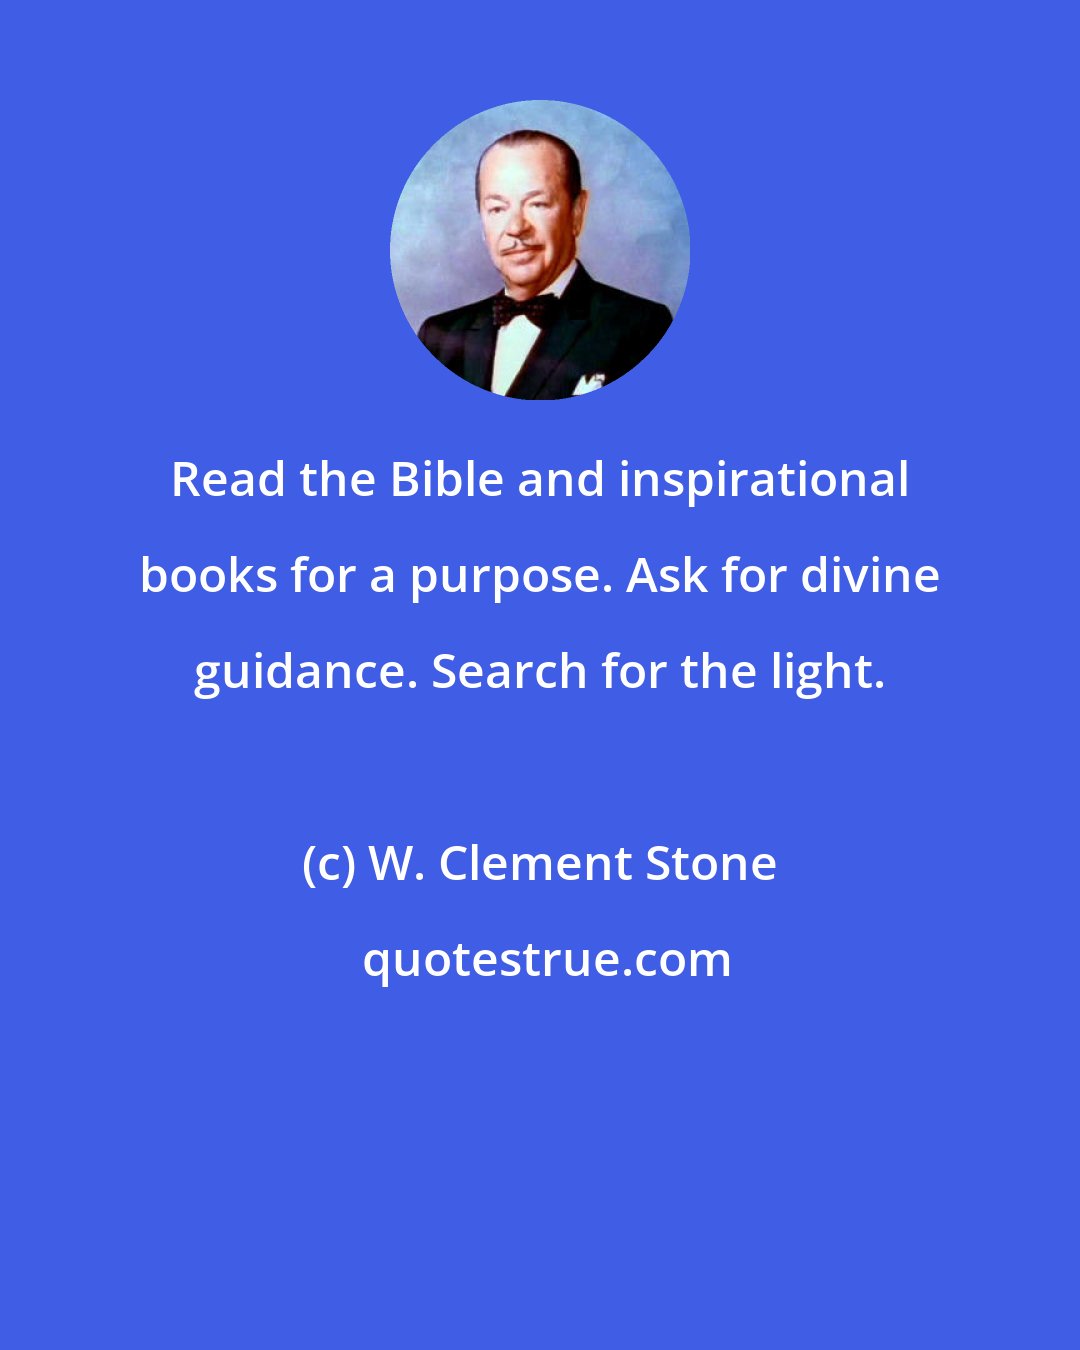 W. Clement Stone: Read the Bible and inspirational books for a purpose. Ask for divine guidance. Search for the light.